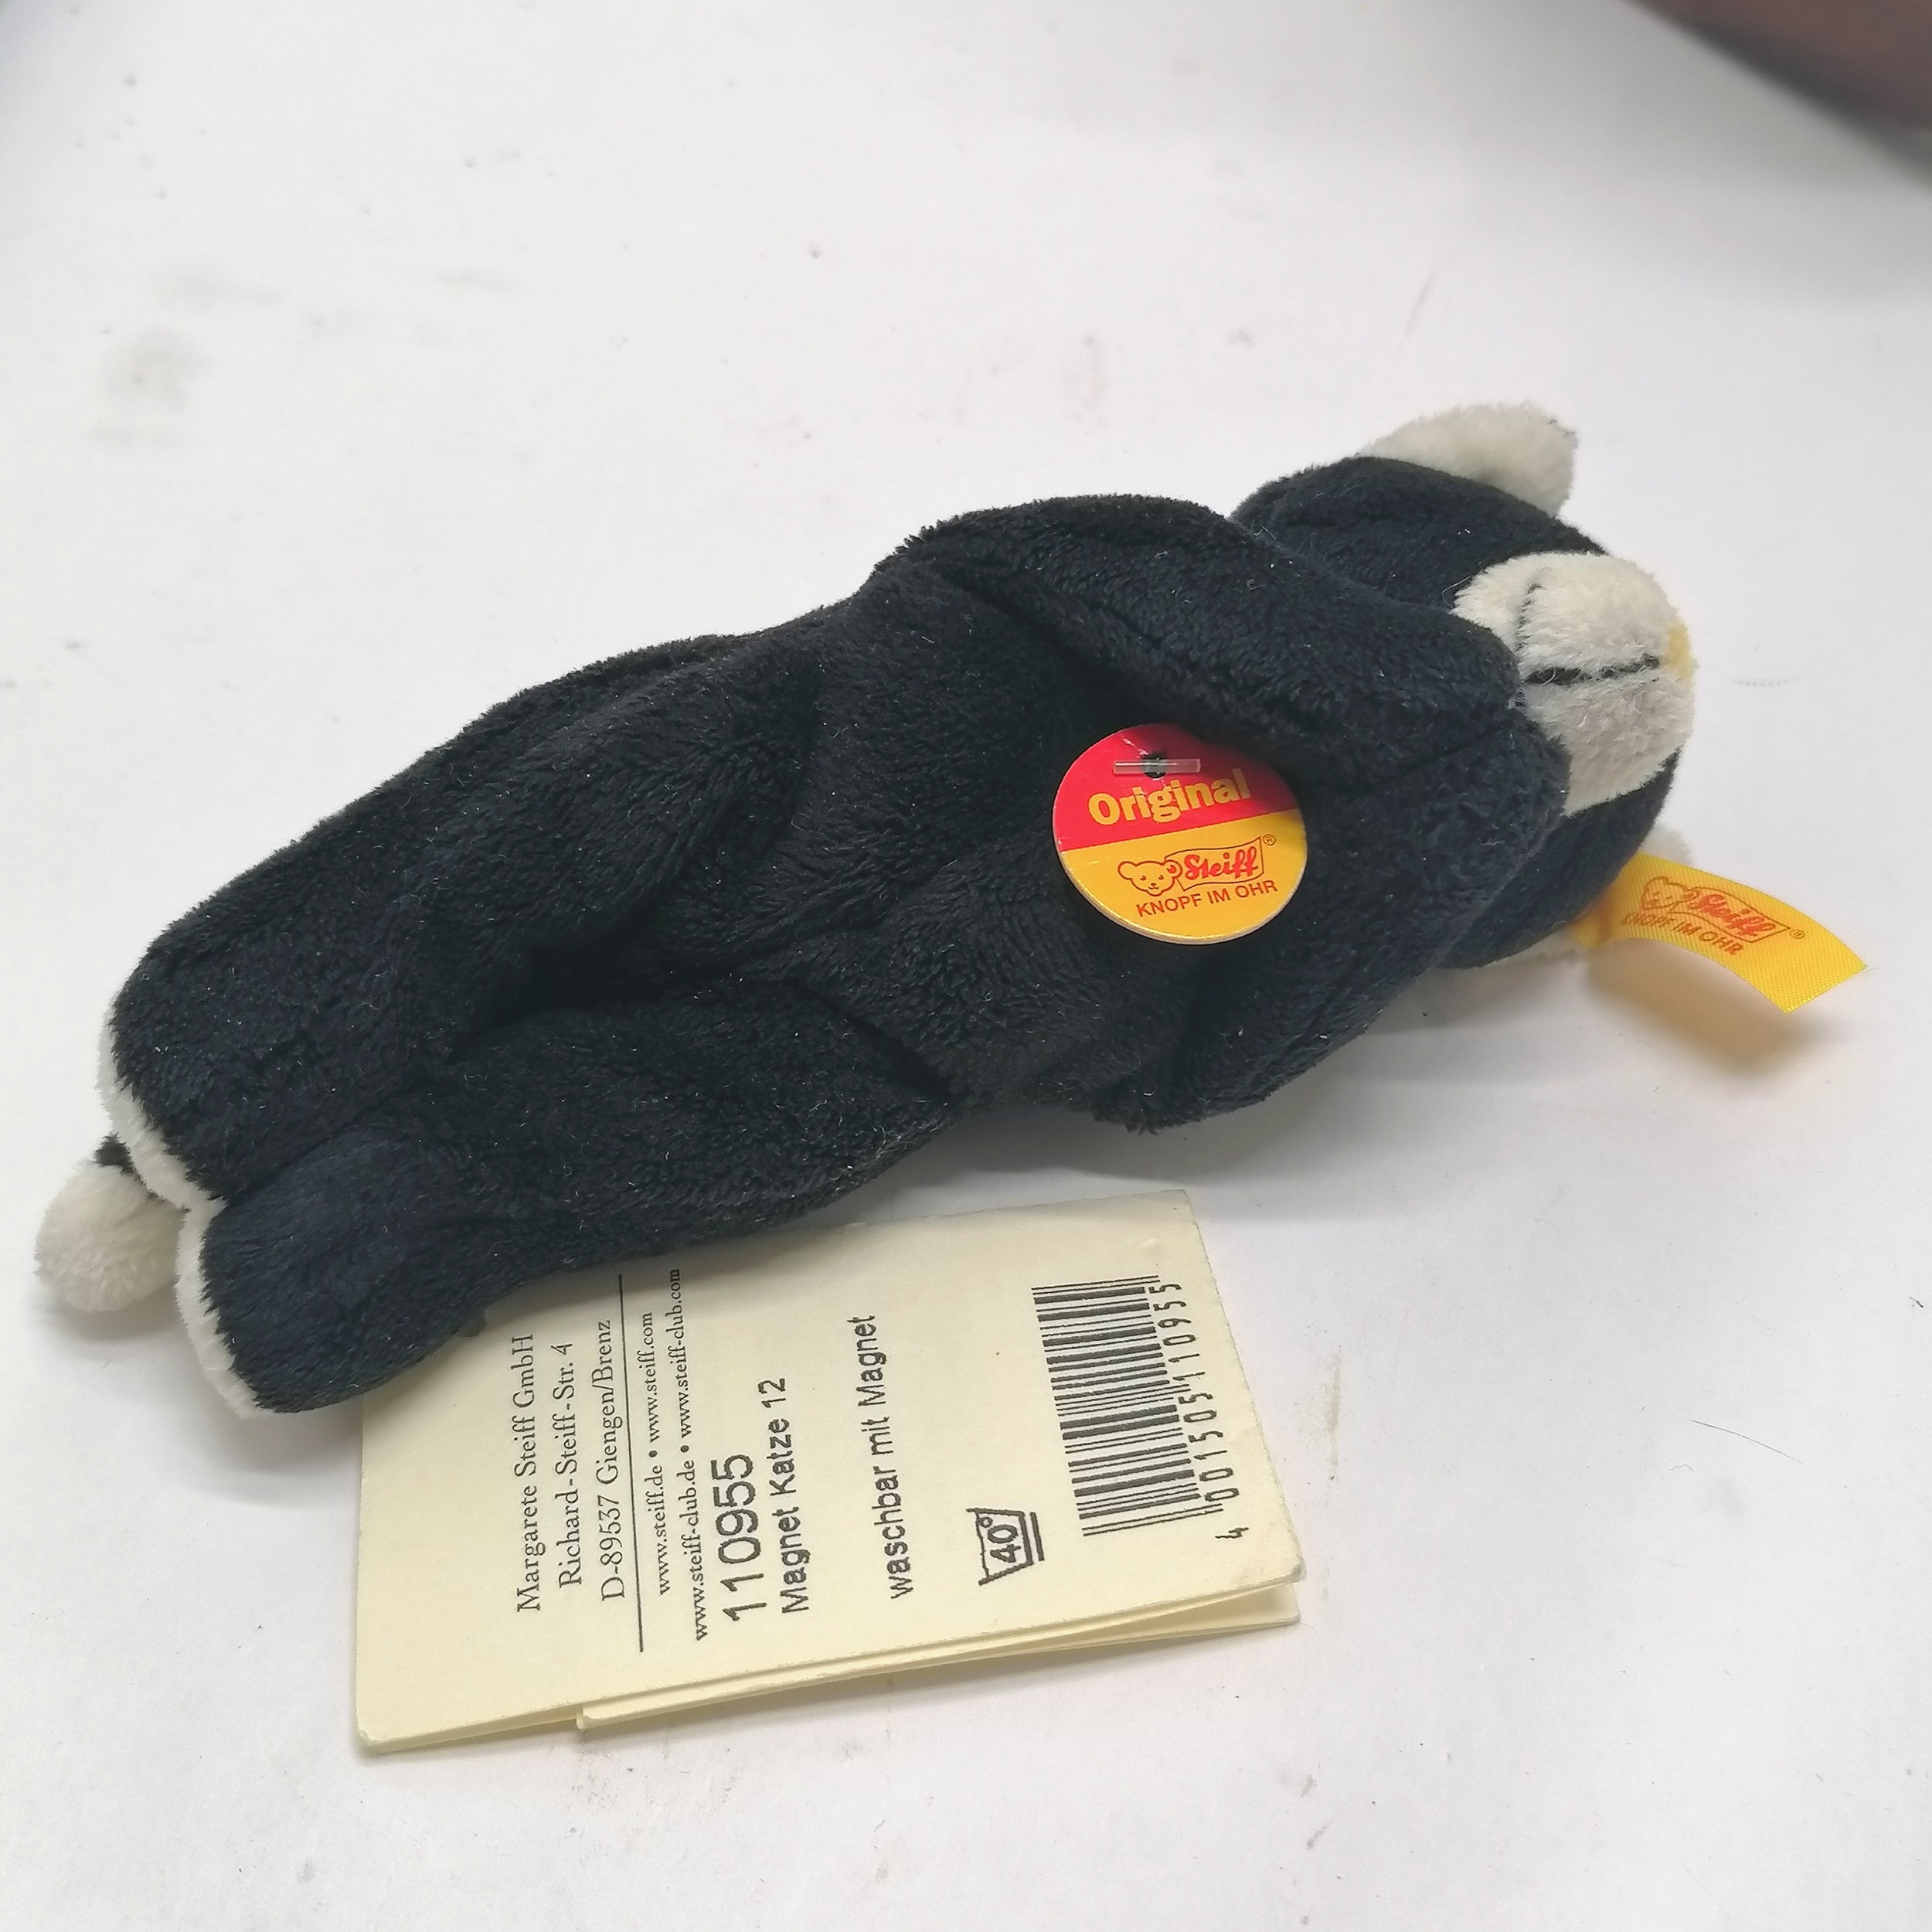 Steiff small black and white teddy toy with original label and tags 13cm long T/W a teddy bear in - Image 2 of 2